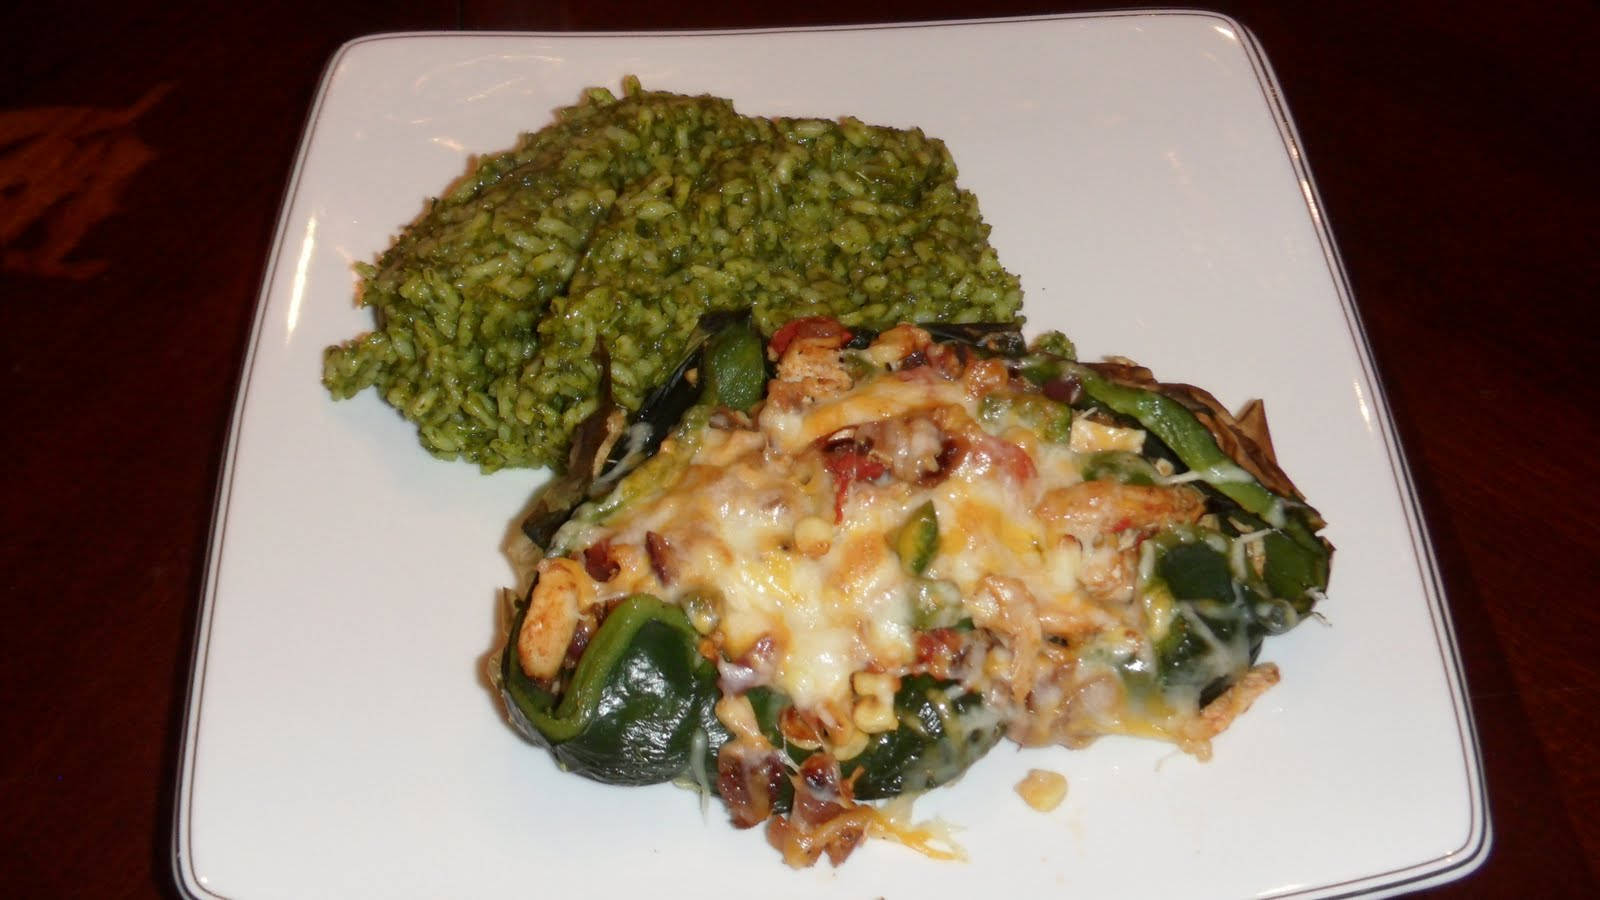 Savory Baked Poblano Chili Rellenos with Homemade Roasted Salsa Verde Wallpaper